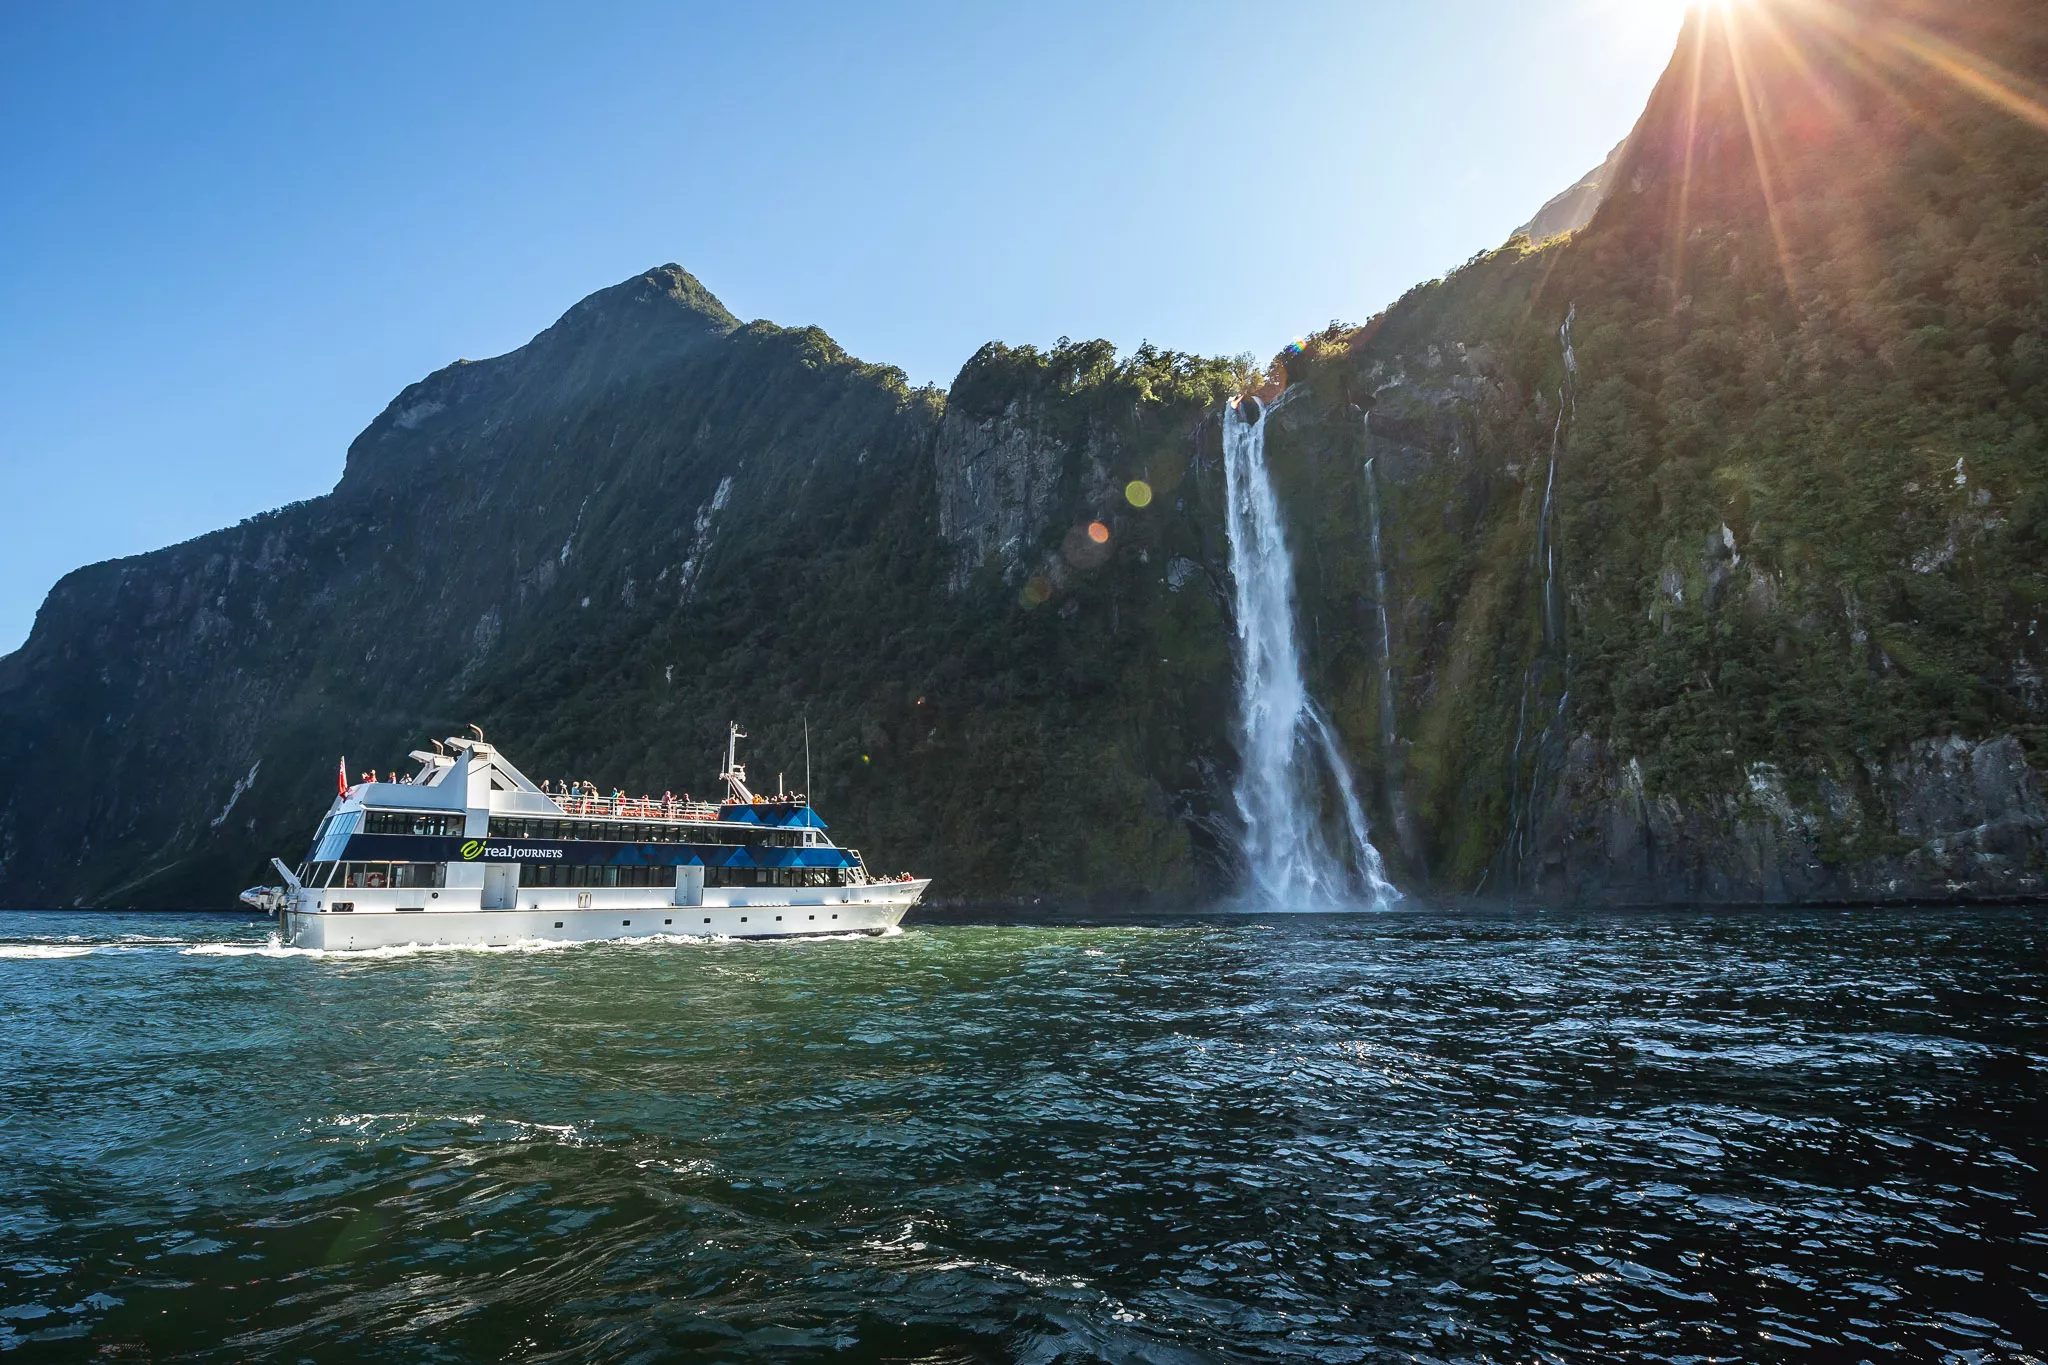 Milford Sound in New Zealand, Australia and Oceania | Nature Reserves - Rated 4